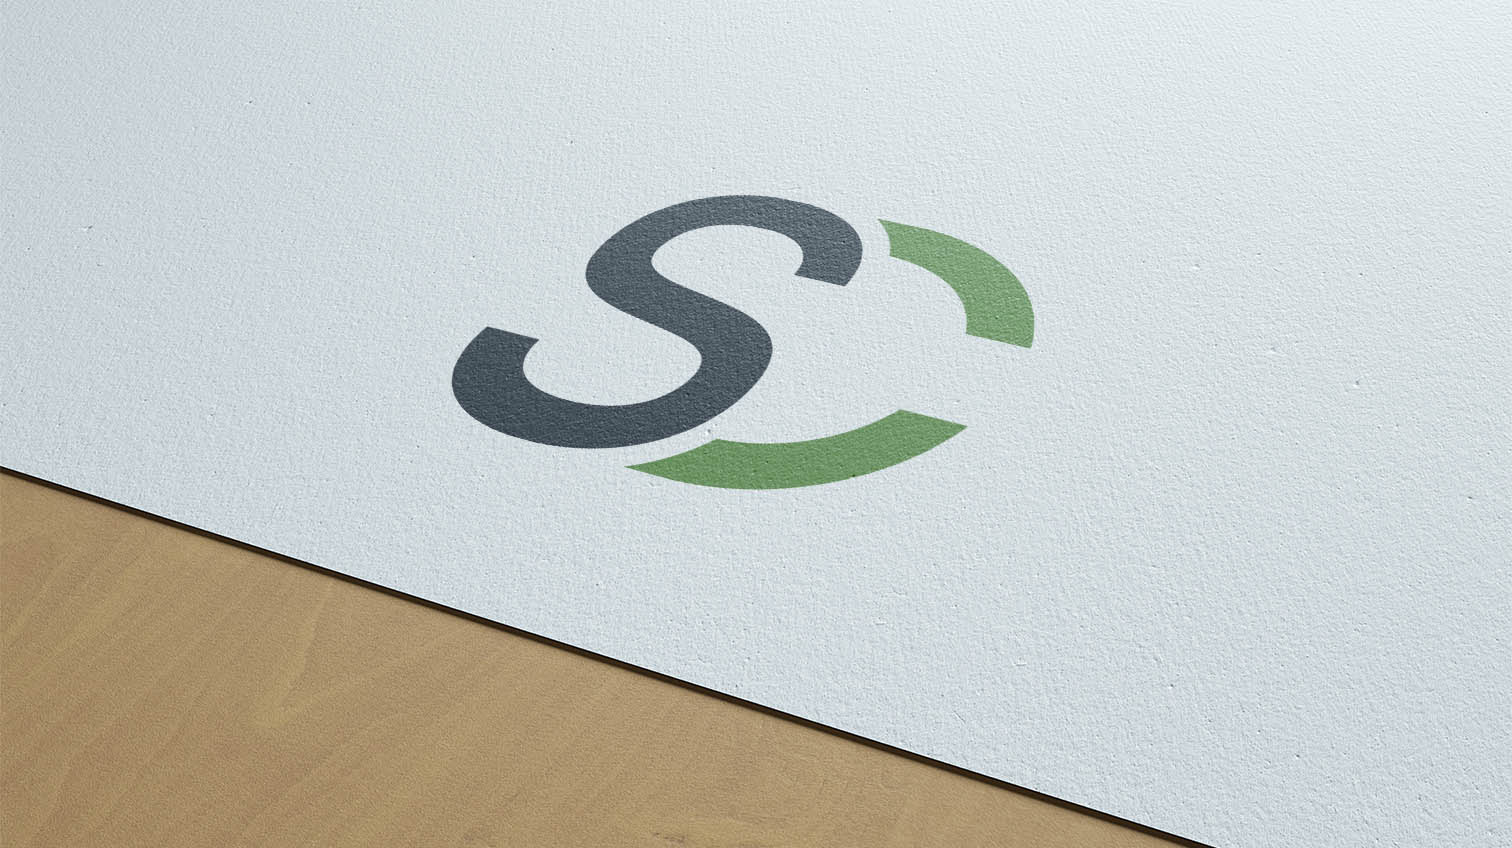 Solinsky Consulting logo on paper - White Canvas Design